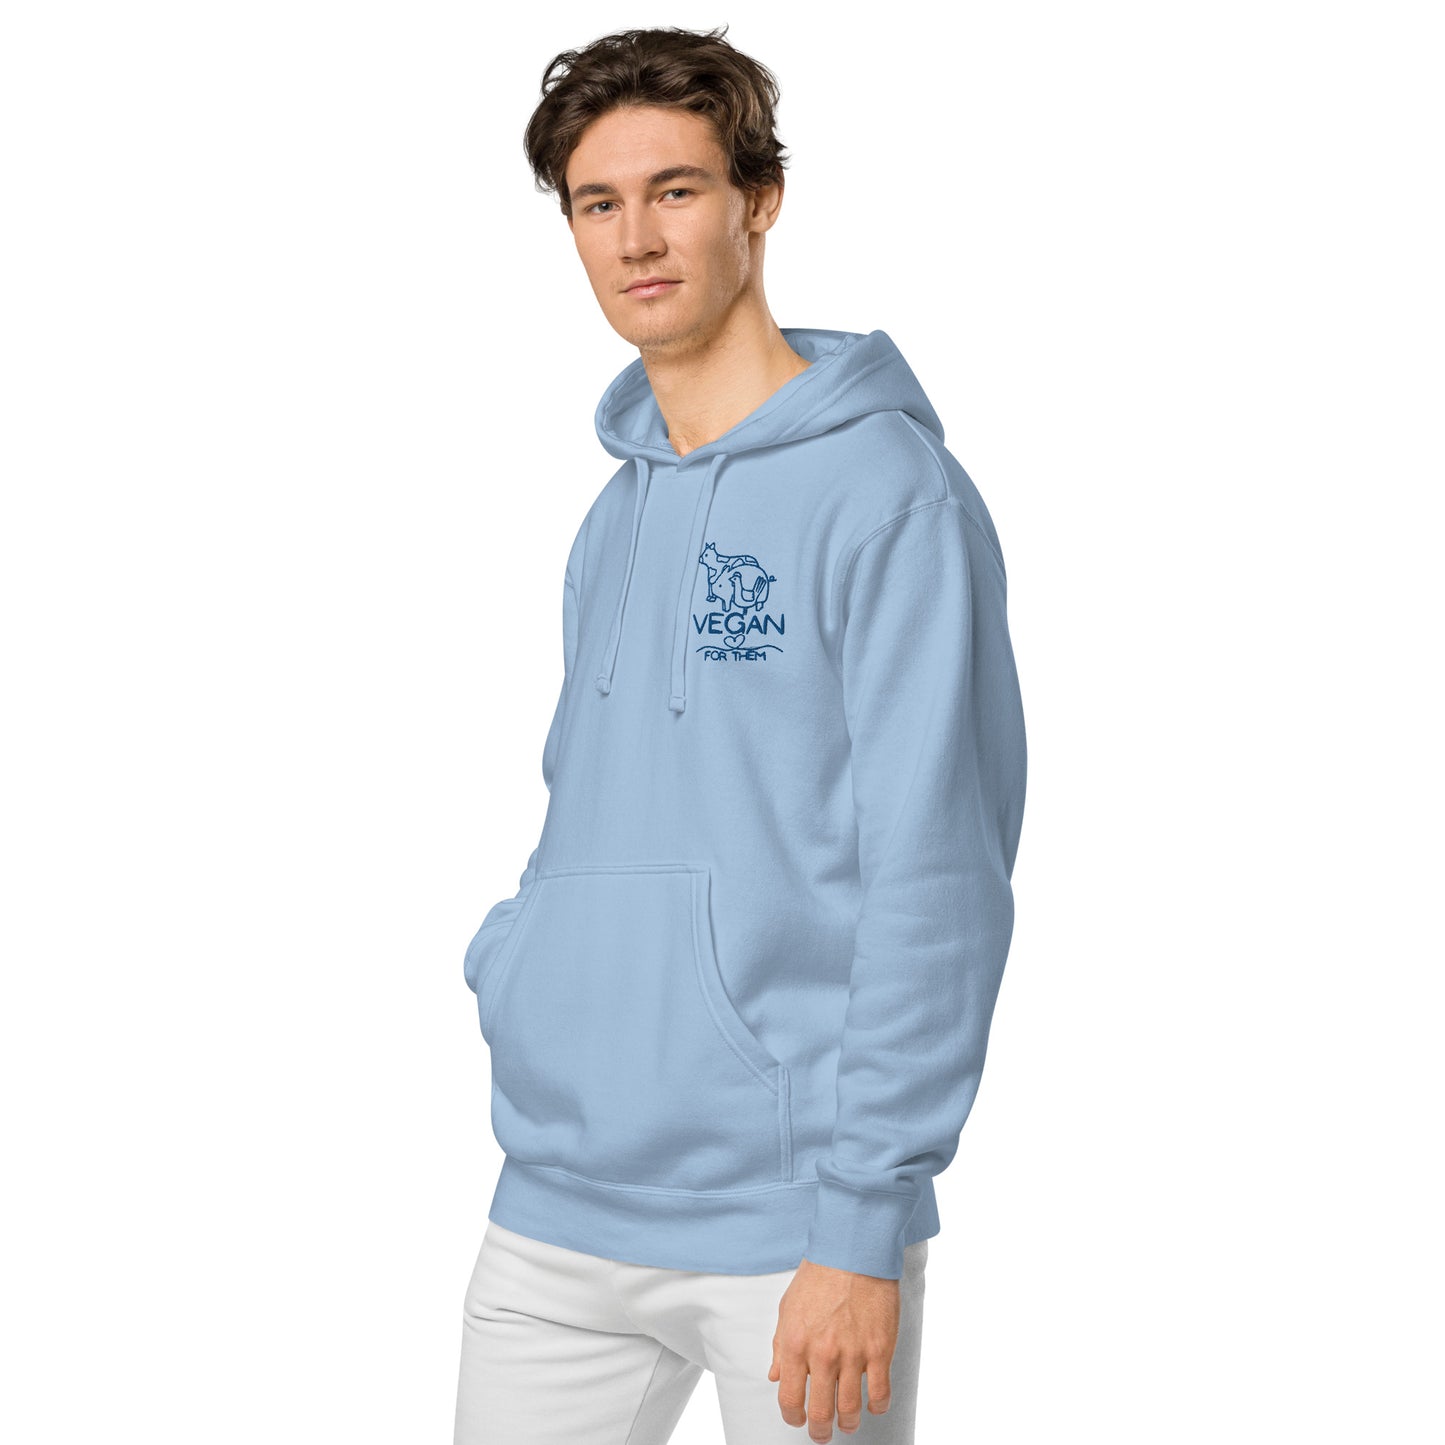 VEGAN For Them Unisex Pigment-Dyed Hoodie